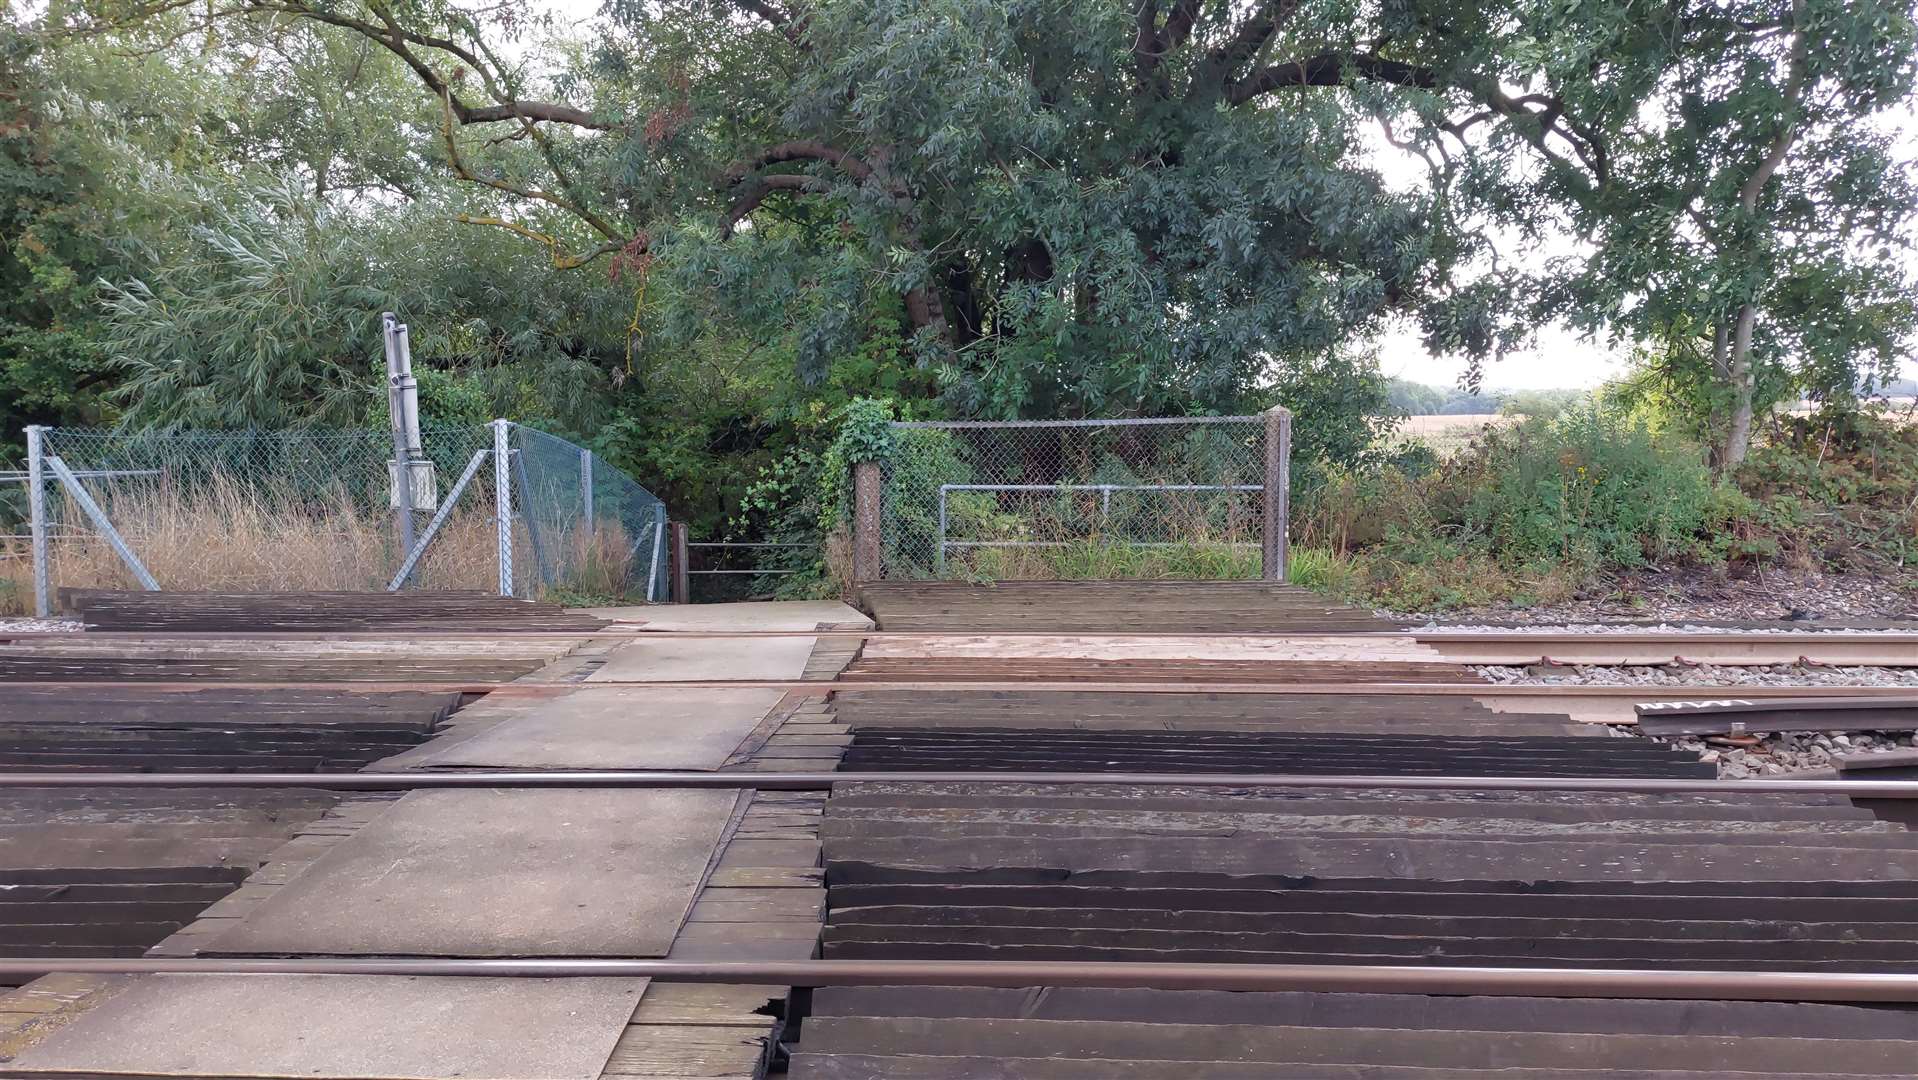 The current Cradle Bridge level crossing, which is a gate over the rail line